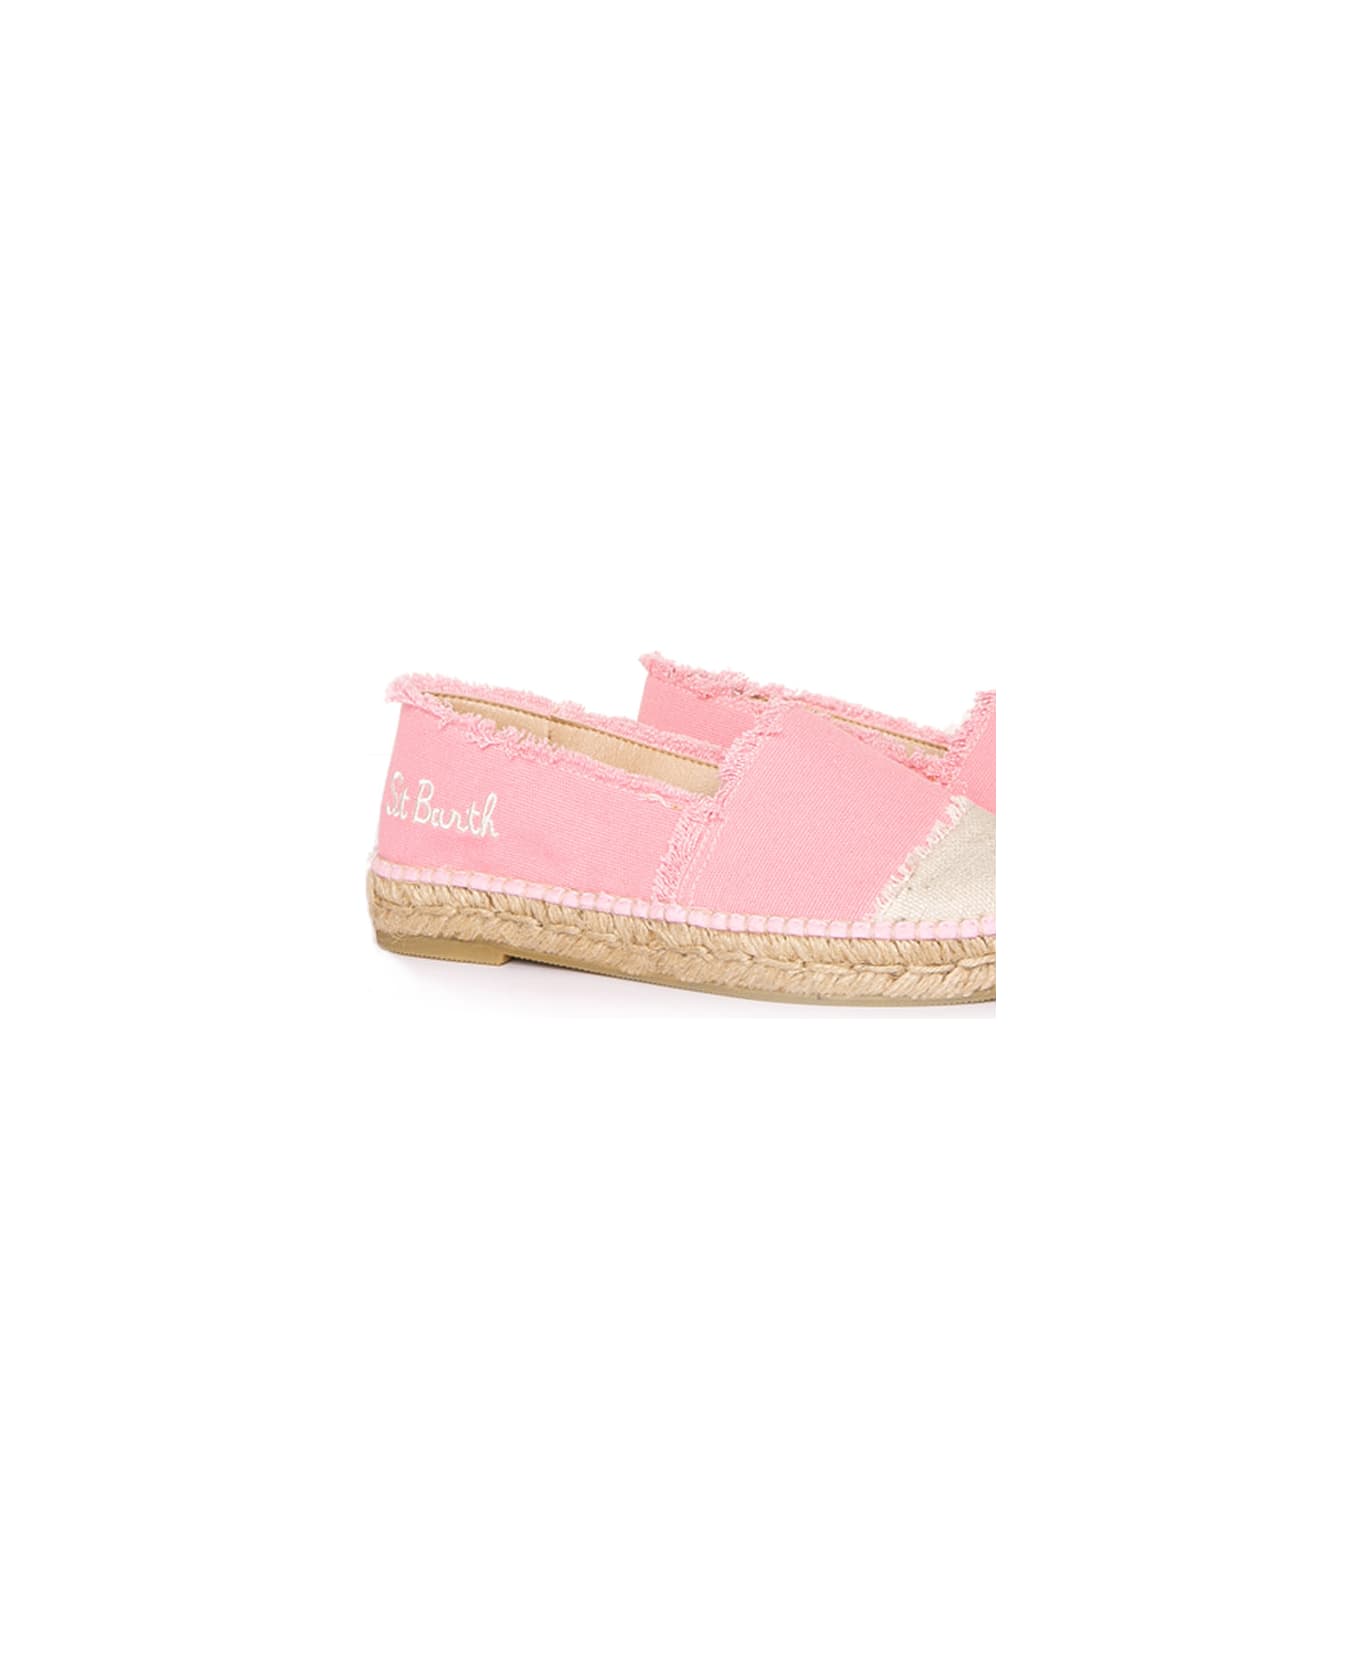 MC2 Saint Barth Pink Canvas Espadrillas With Embroidery - PINK